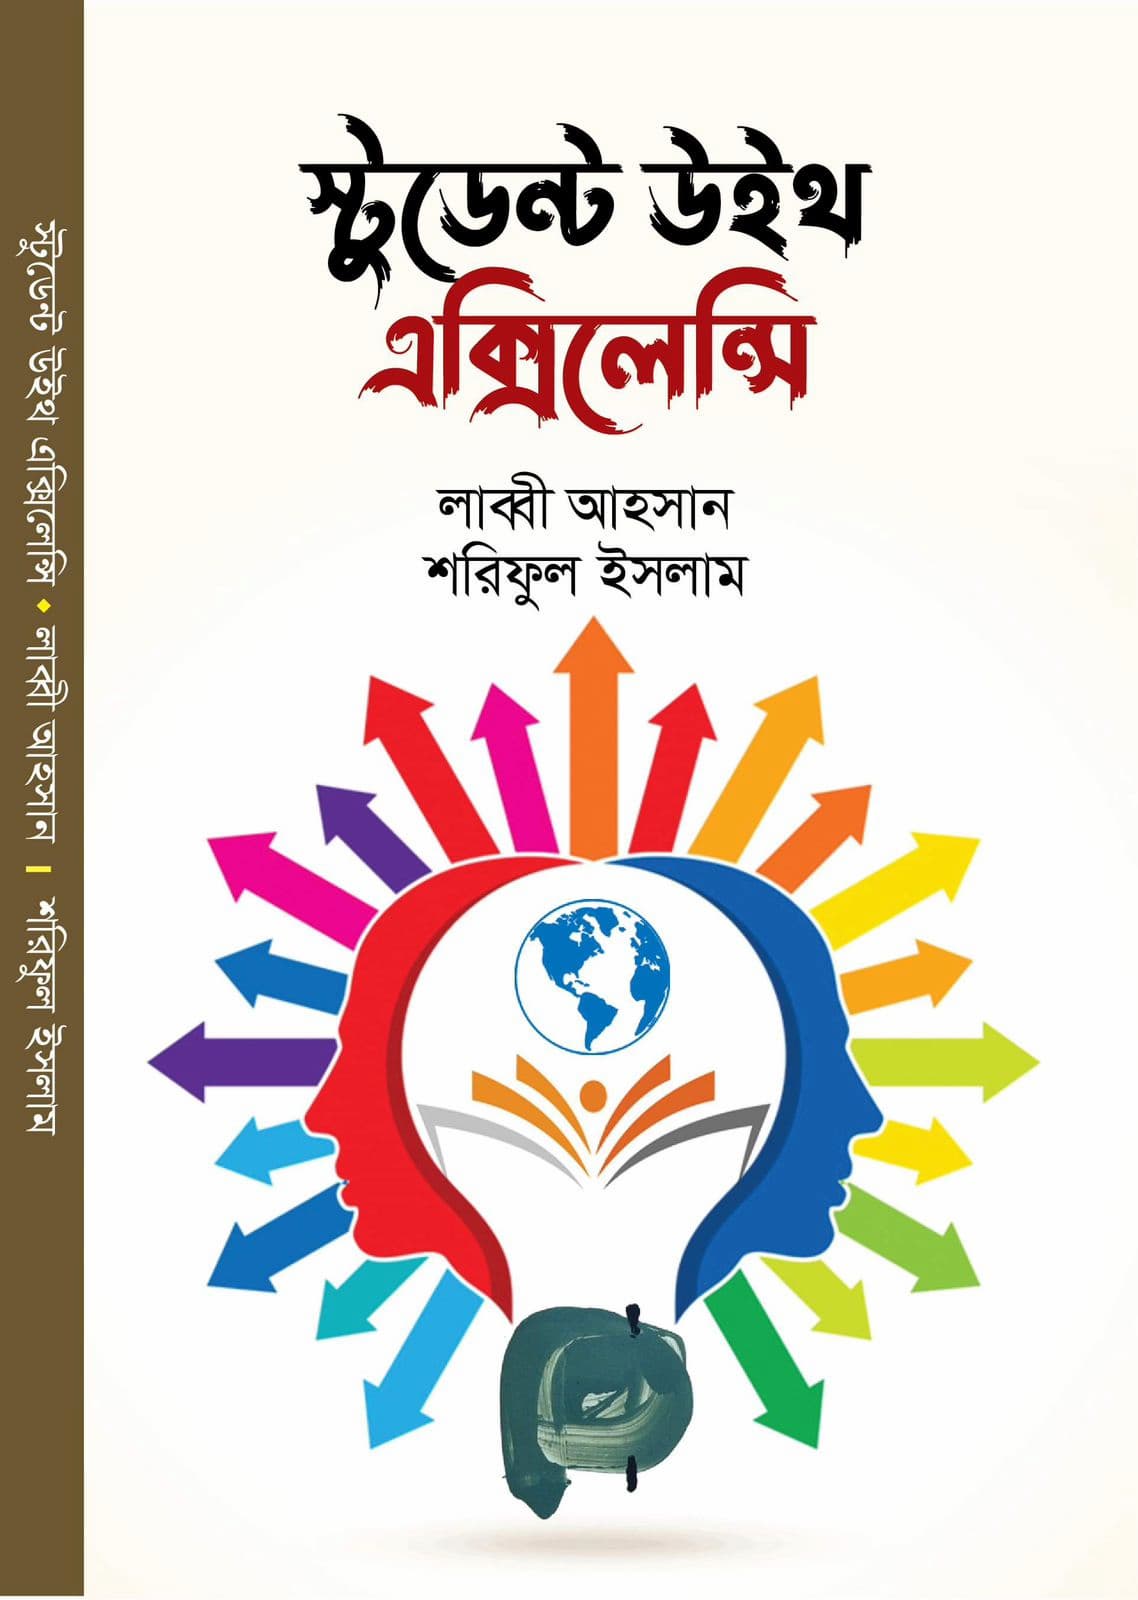 Cover page of Student with Excellency book